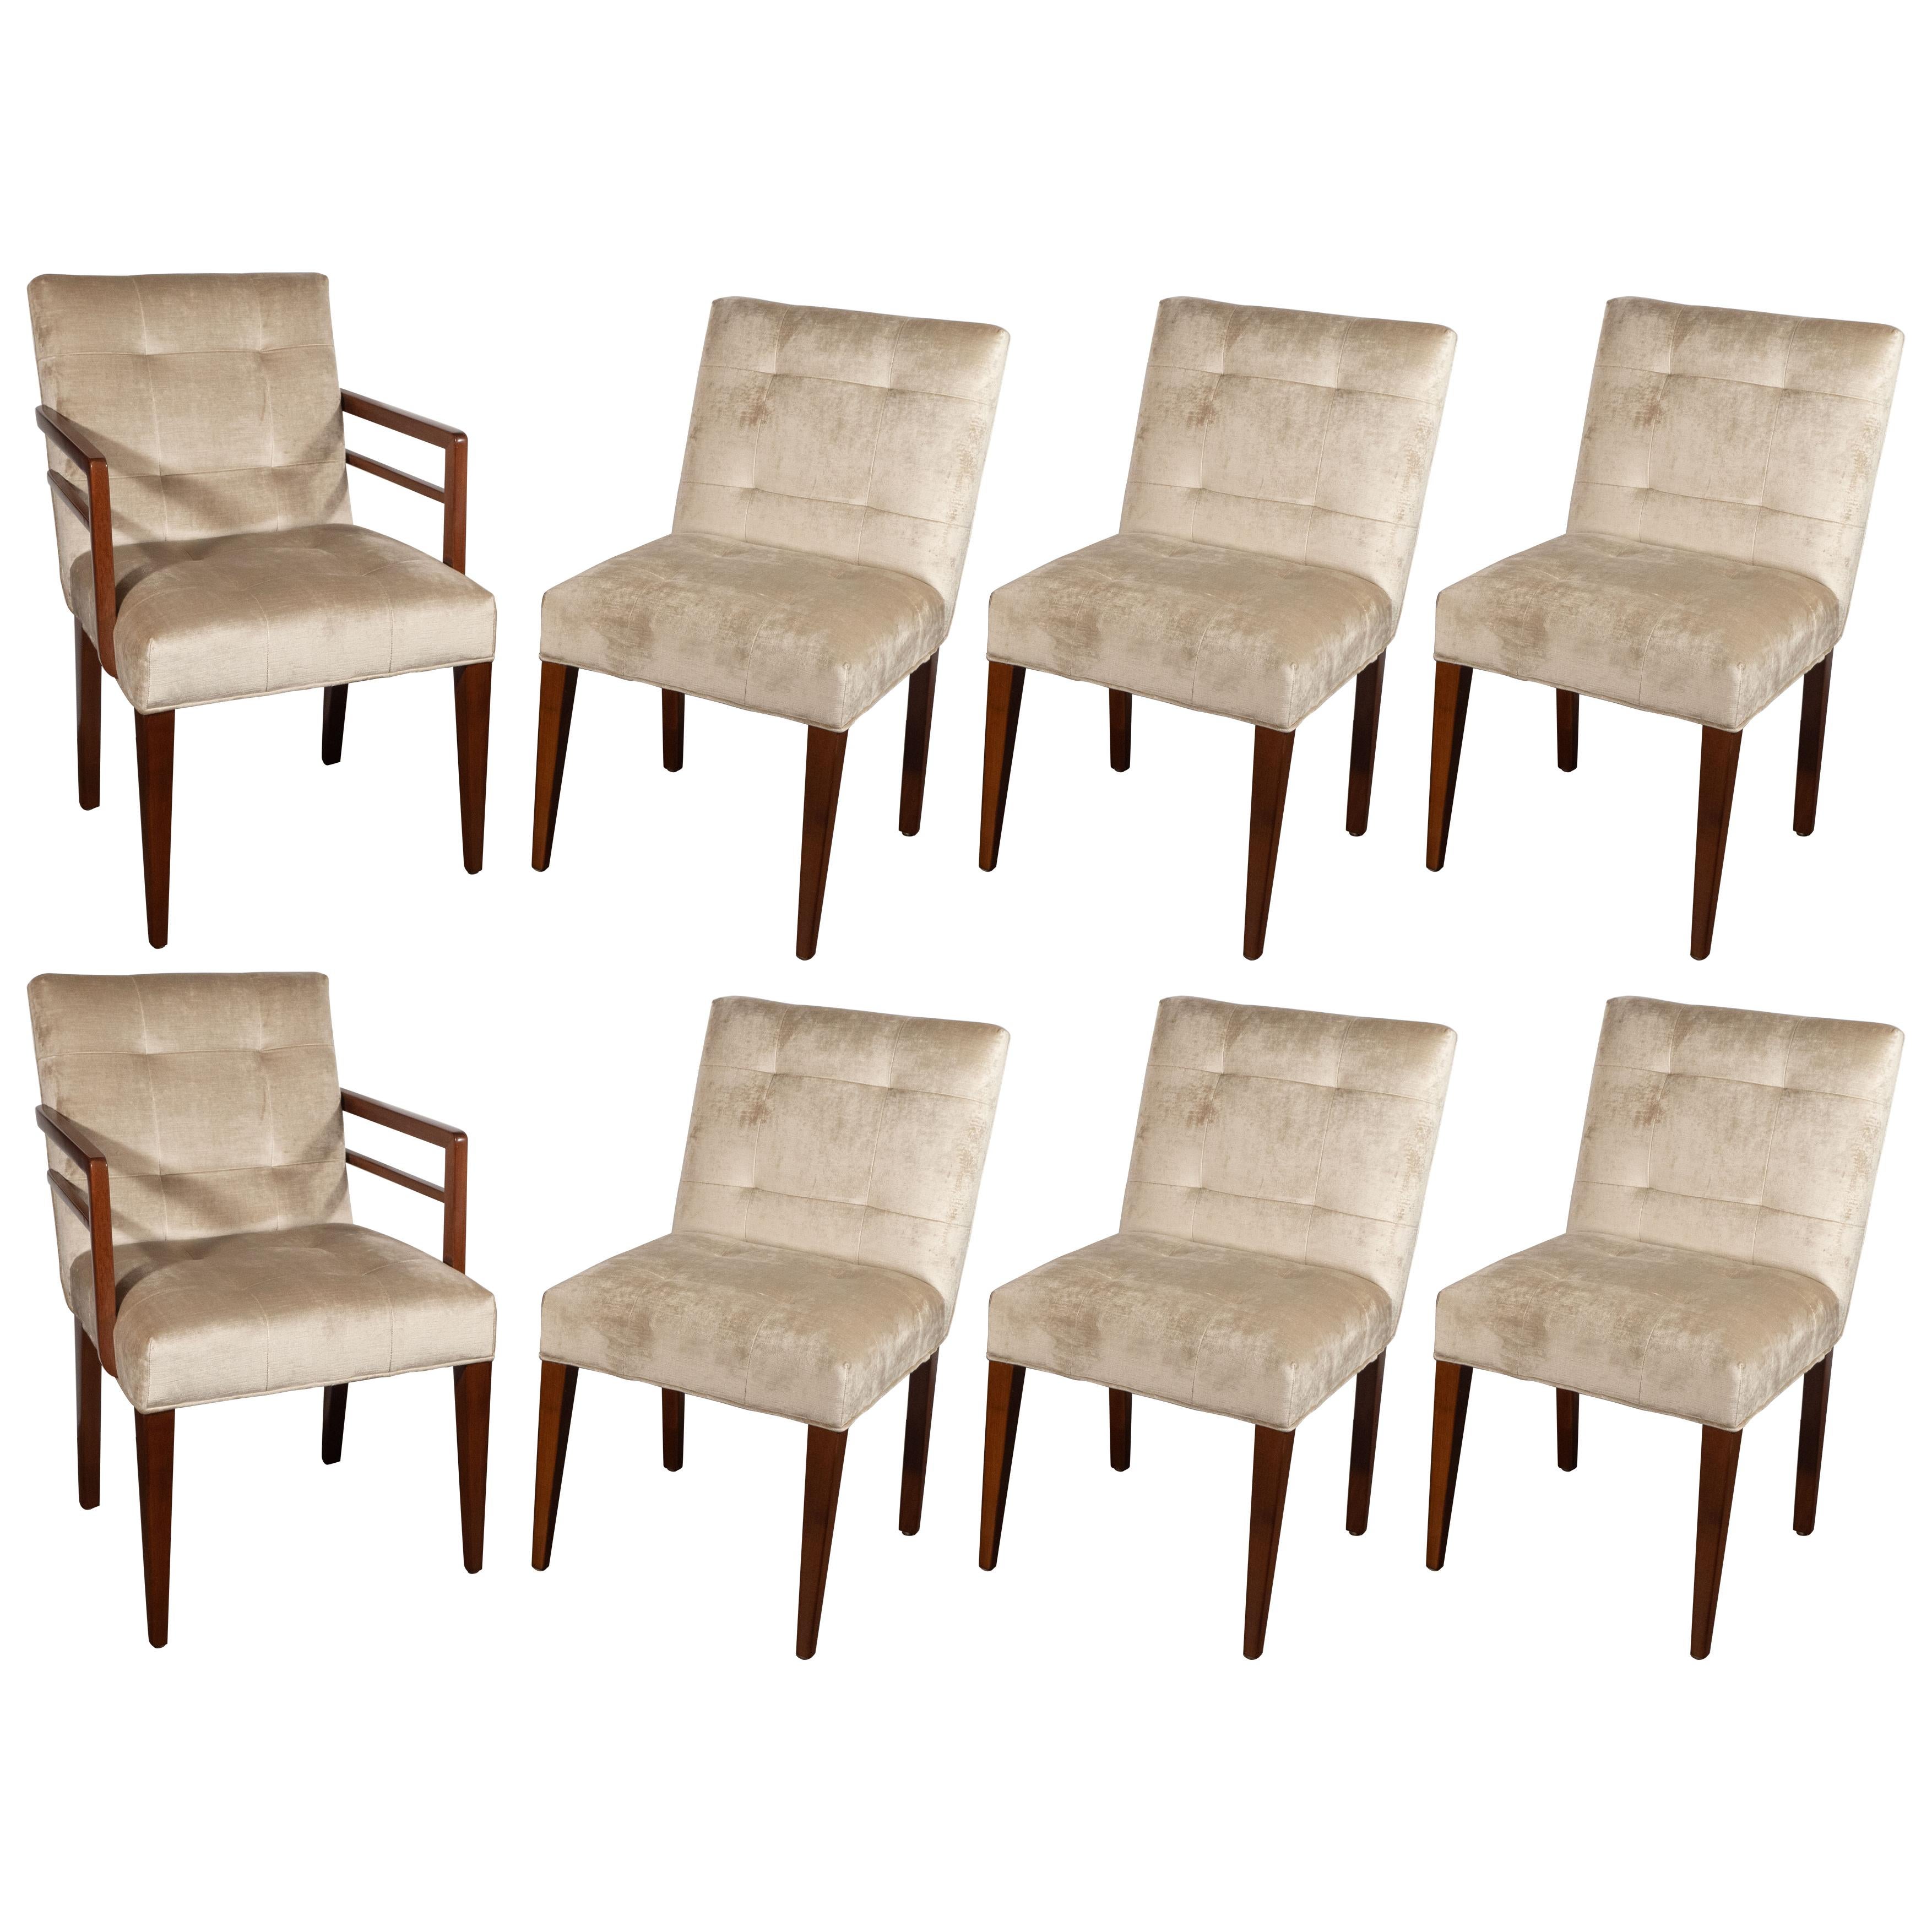 Set of Eight Art Deco Dining Chairs in Walnut & Champagne Velvet, Gilbert Rohde